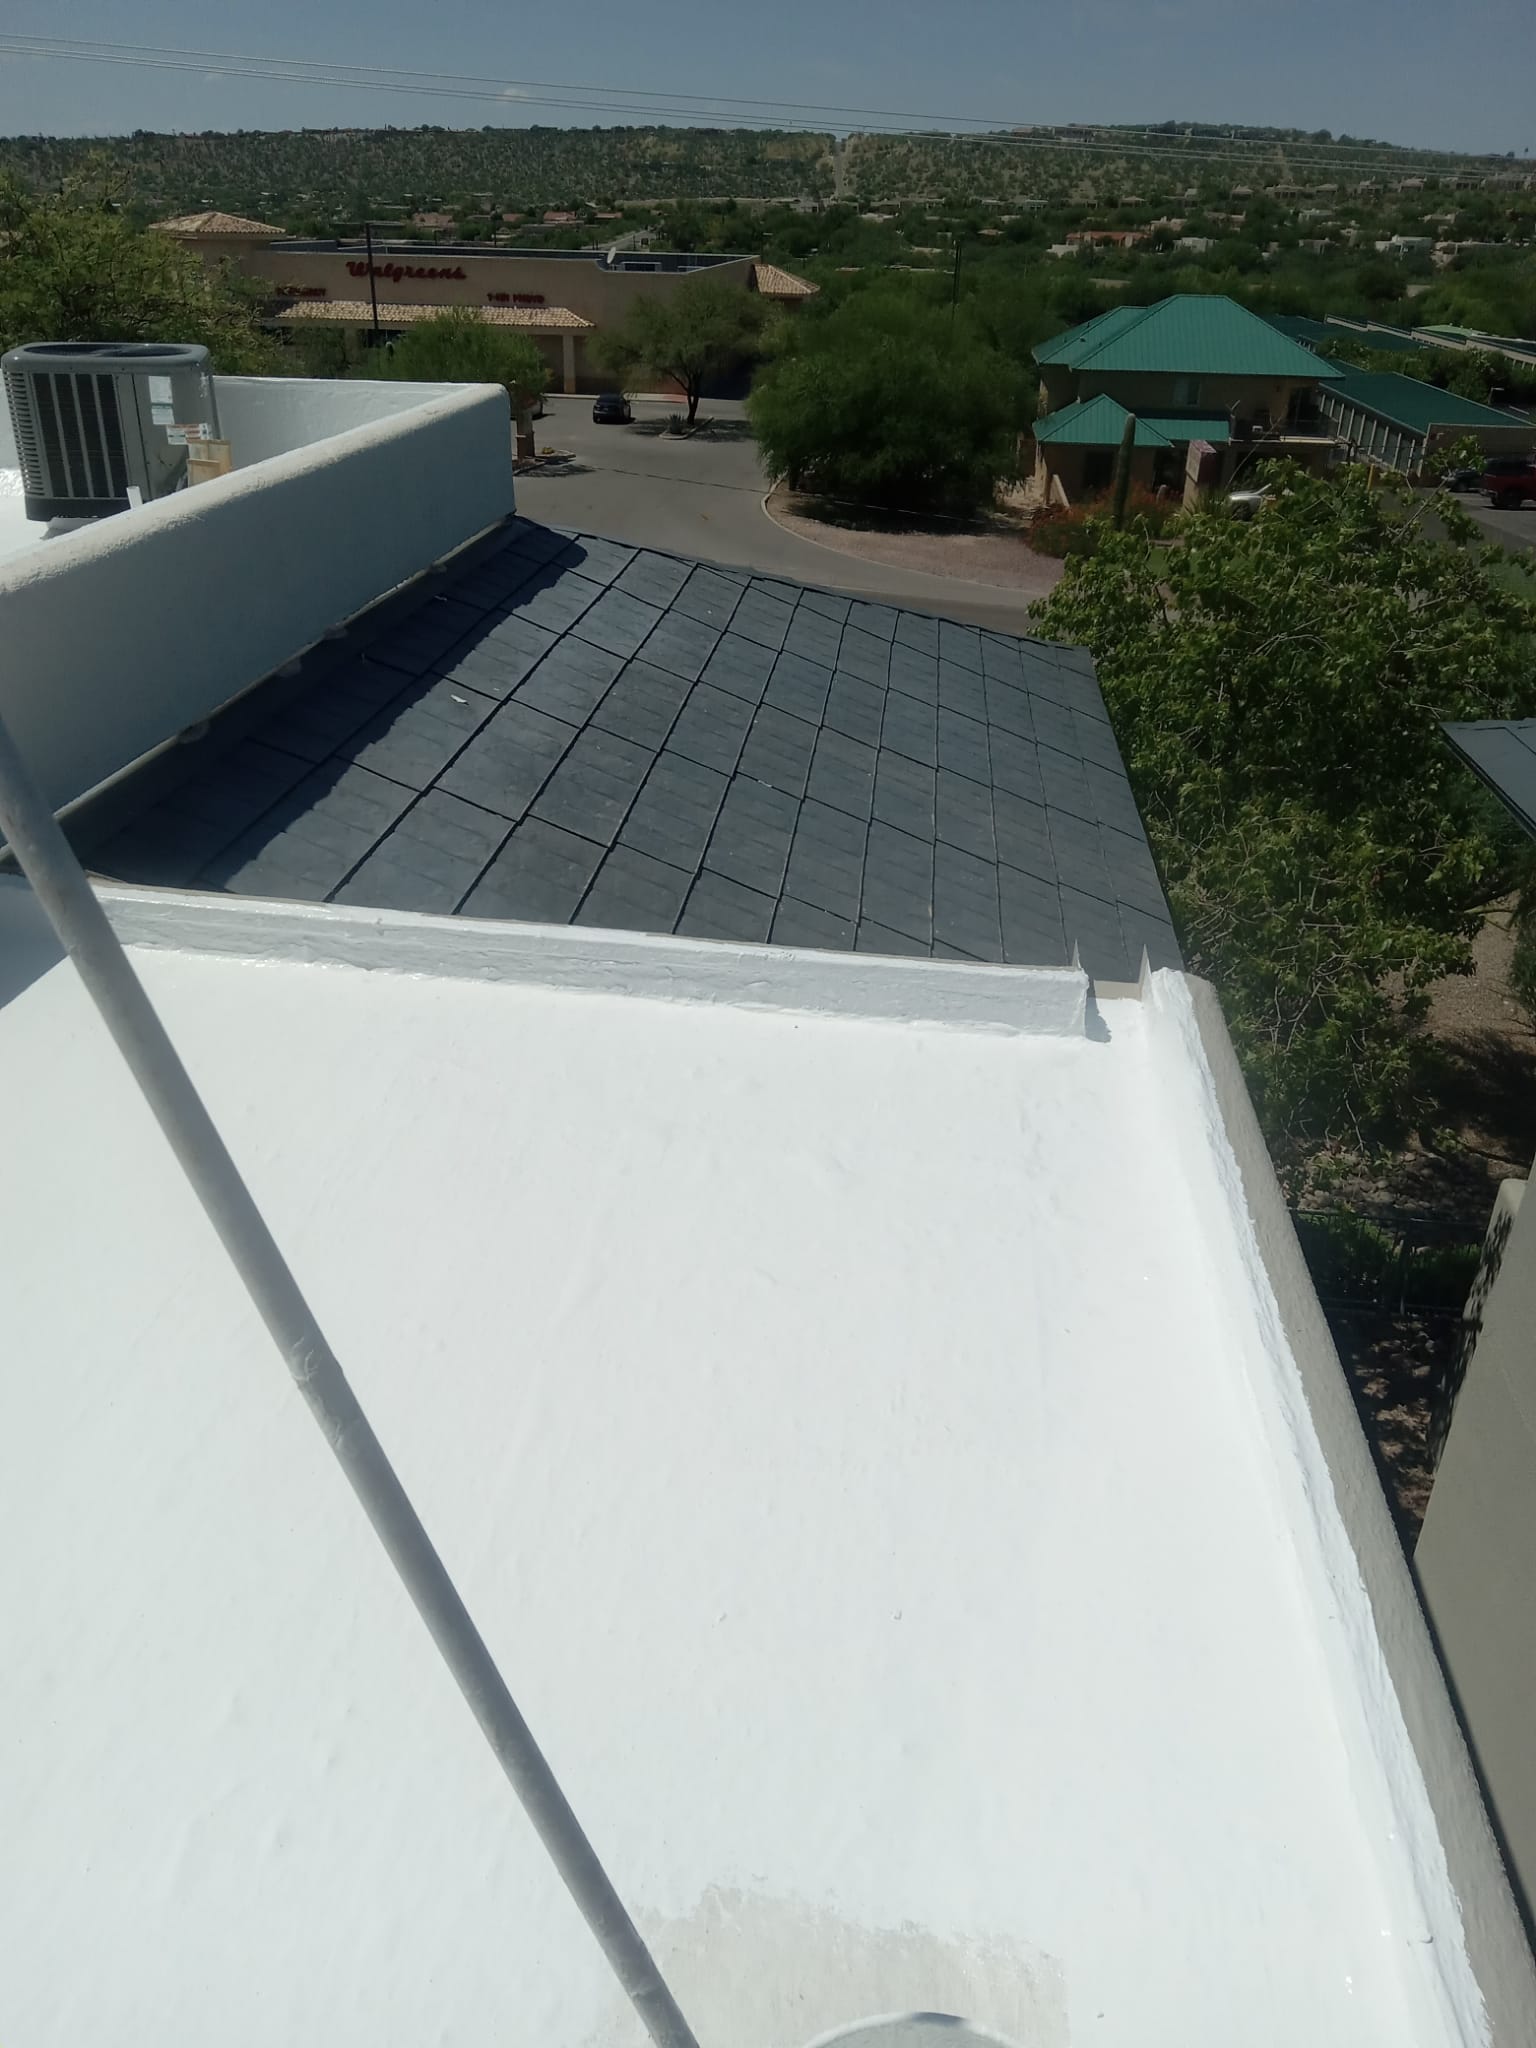 View of a foam roof and reflective coating on a Cave Creek home.